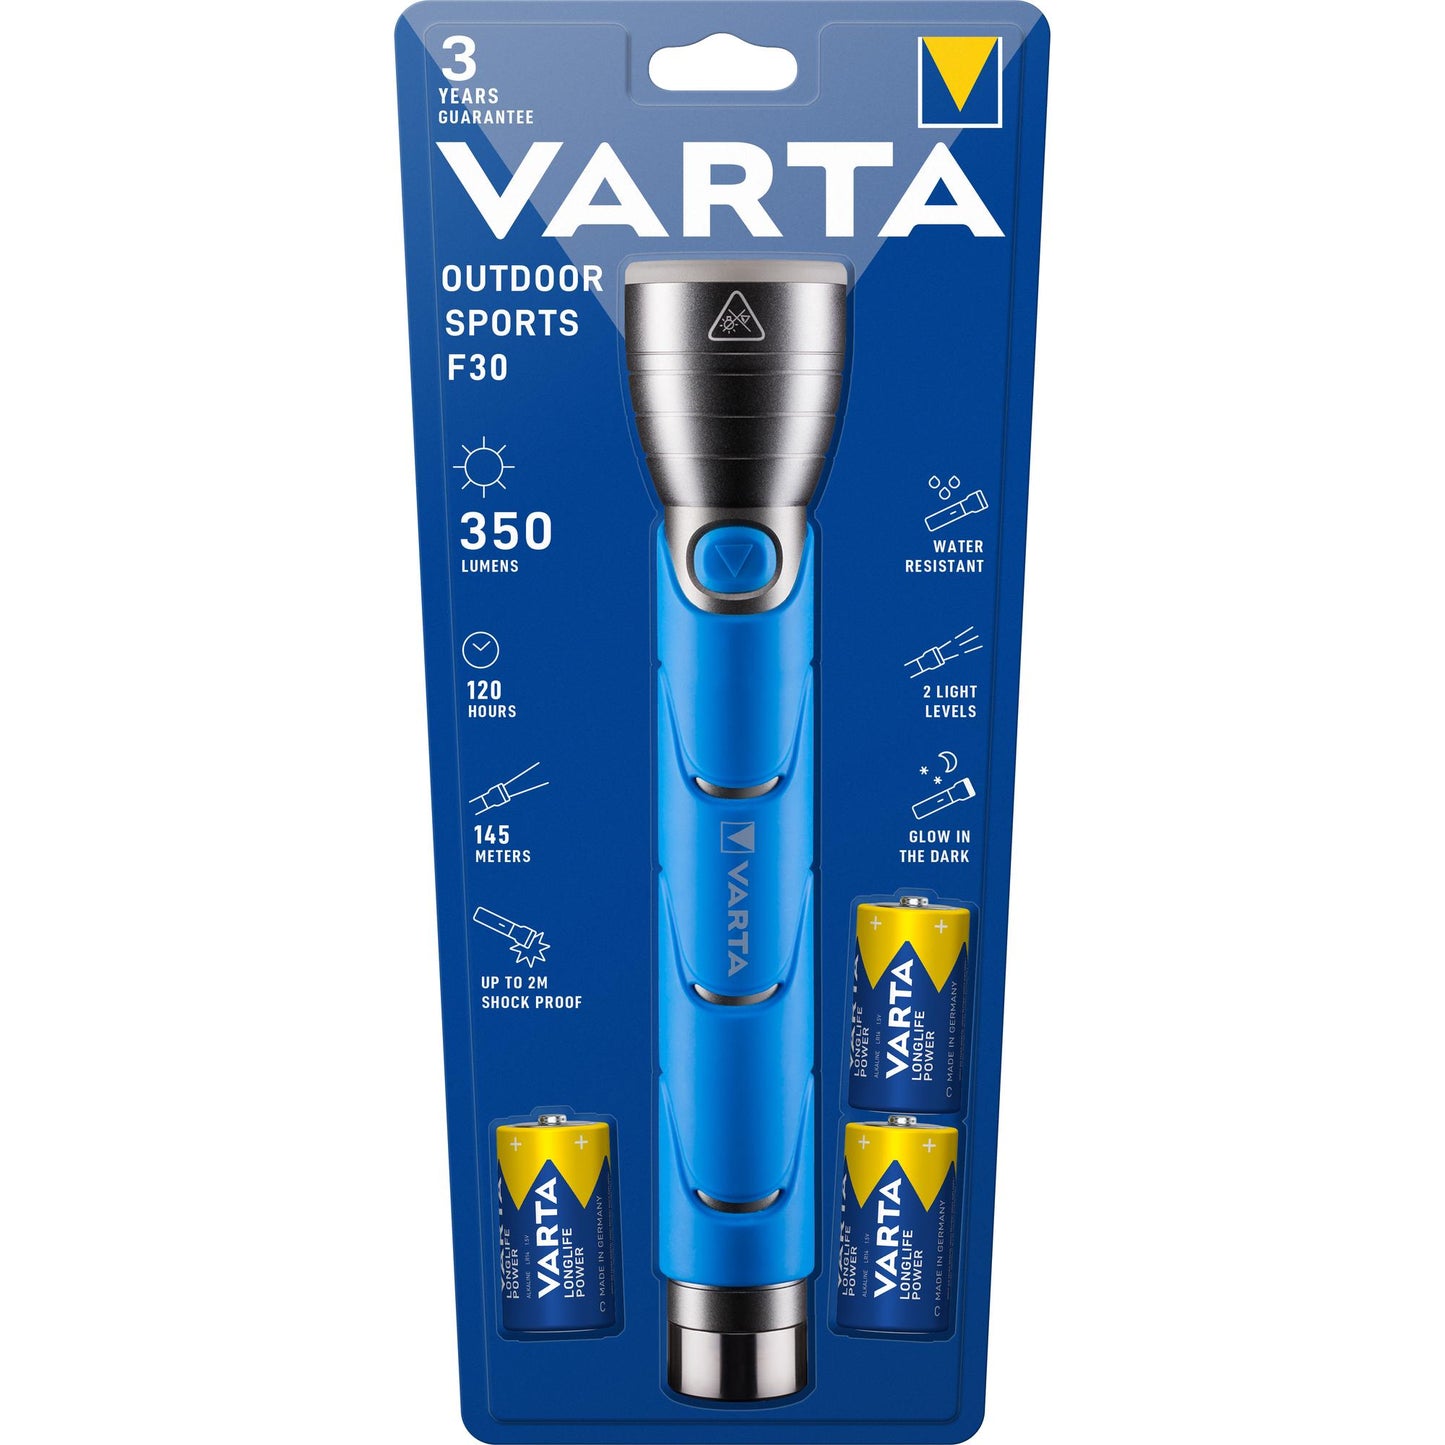 VARTA Outdoor Sports F30 LED Taschenlampe - 350lm inkl. 3x Baby C Batterie Retail Blister